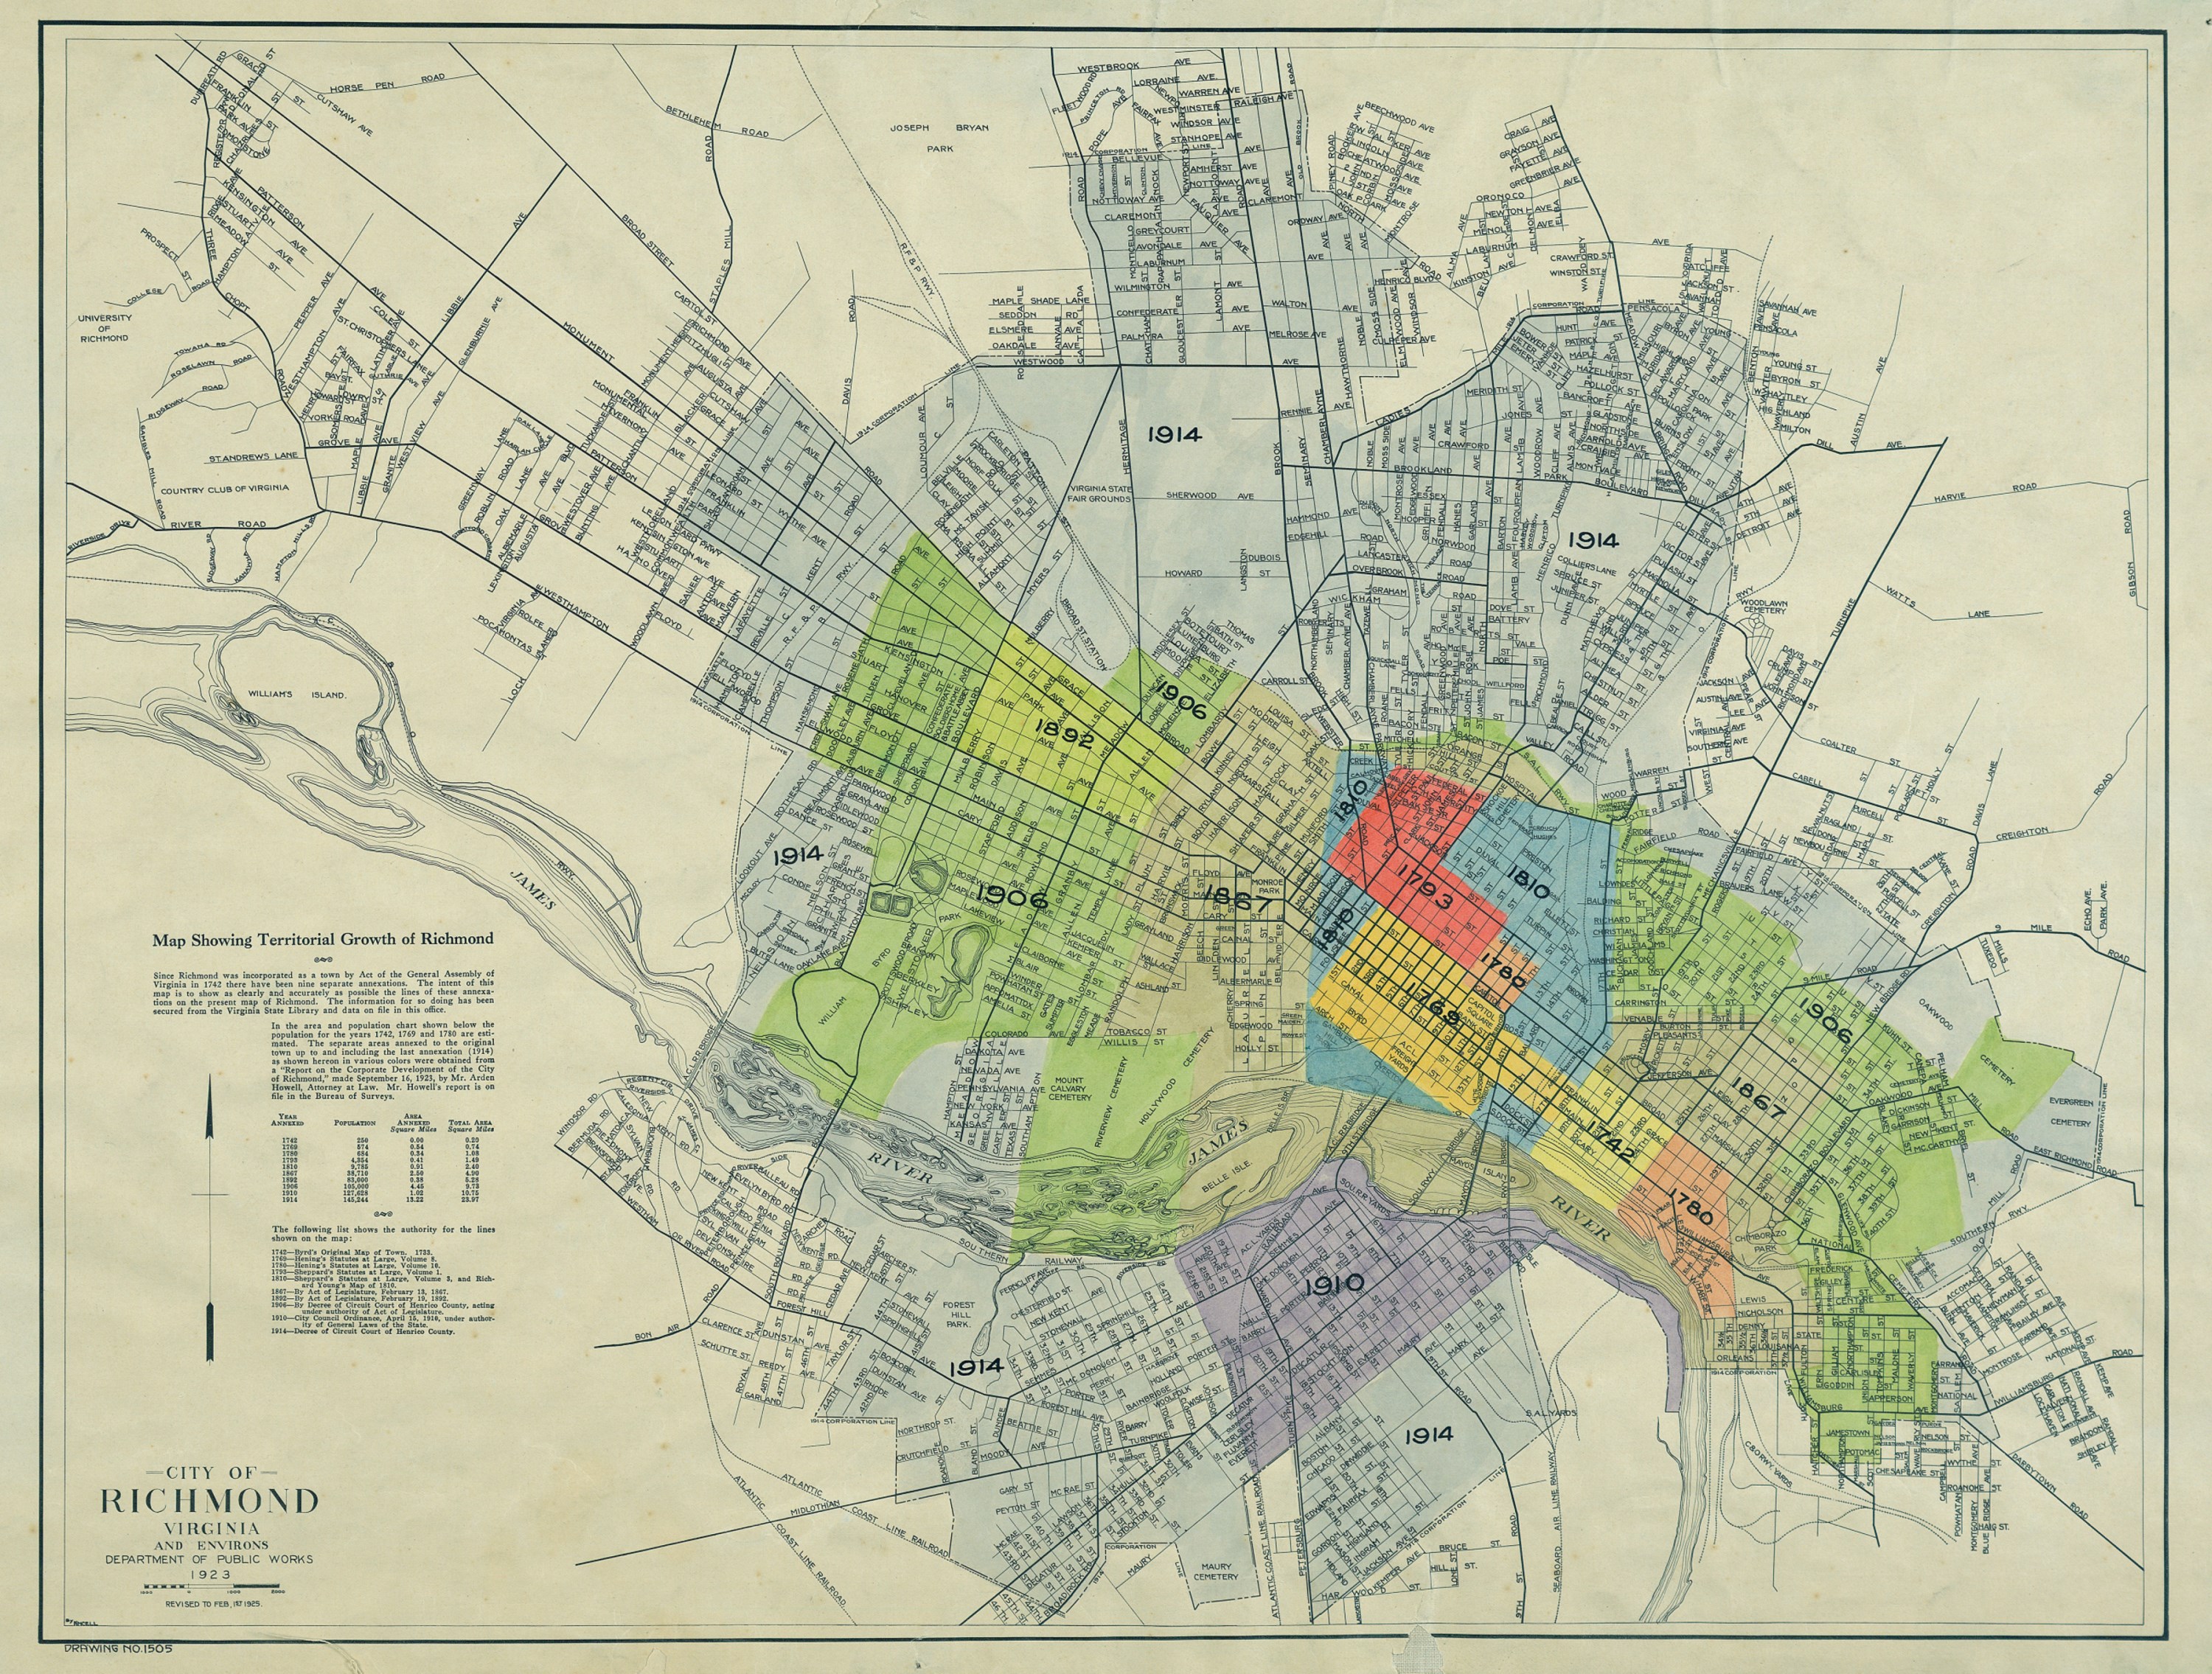 Map Showing Territorial Growth of Richmond, Department of Public Works